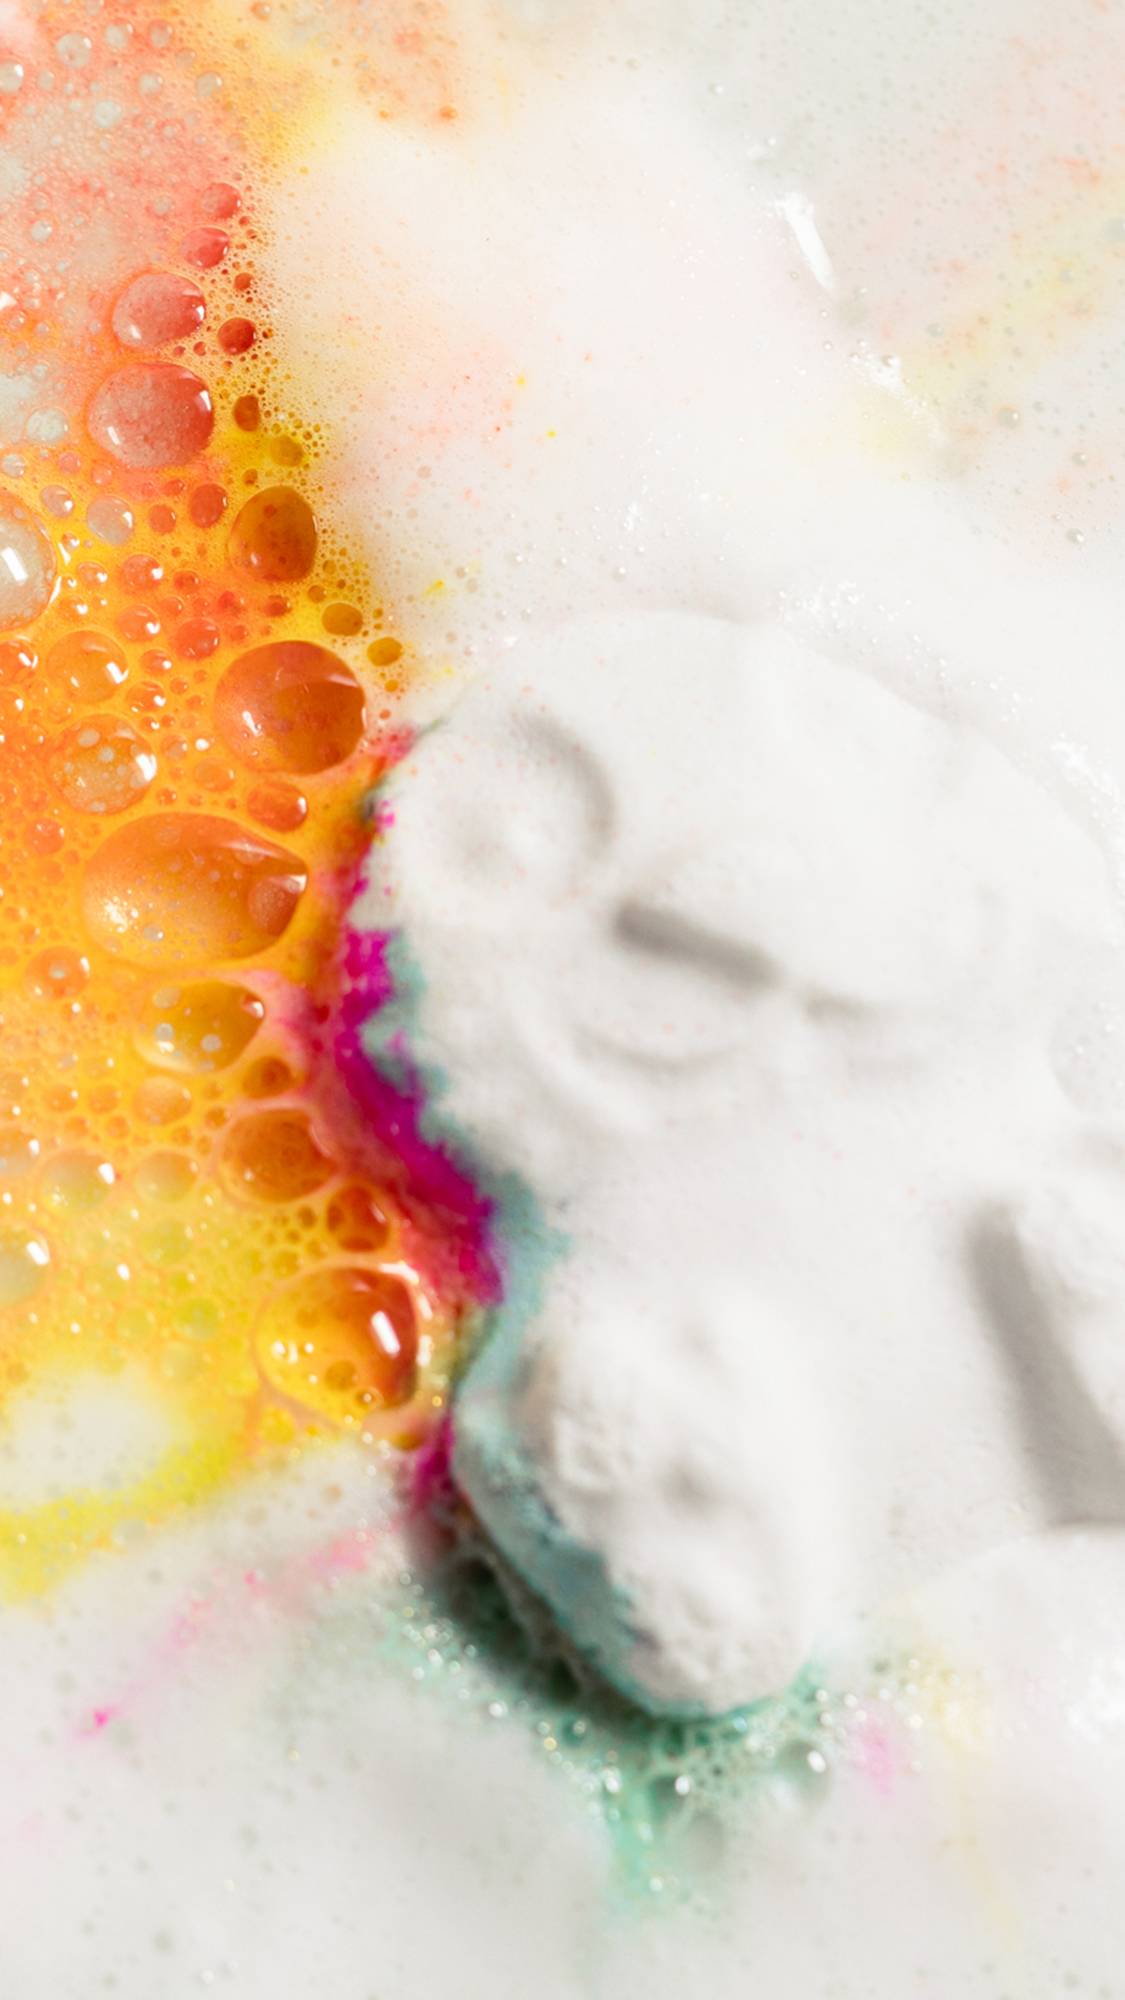 The Follow The White Rabbit bath bomb is dissolving in the bath water giving off thick white foam along with vibrant pink, orange, yellow and blue.